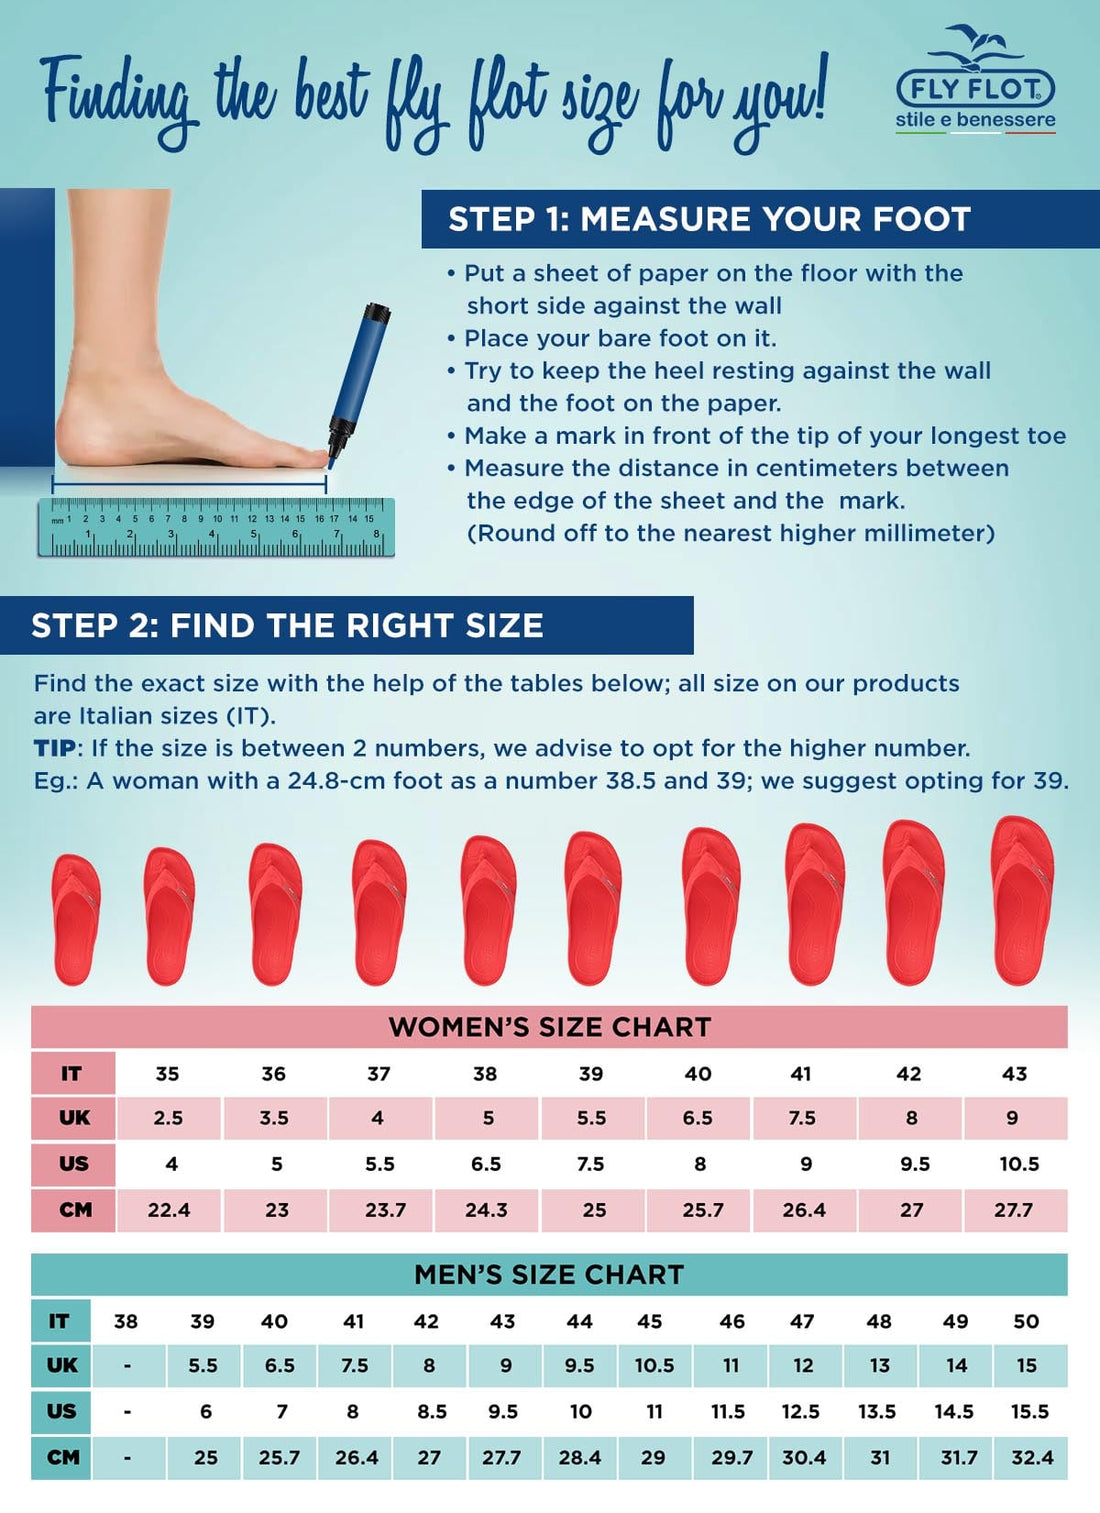 FINDING THE BEST FLY FLOT SIZE FOR YOU!